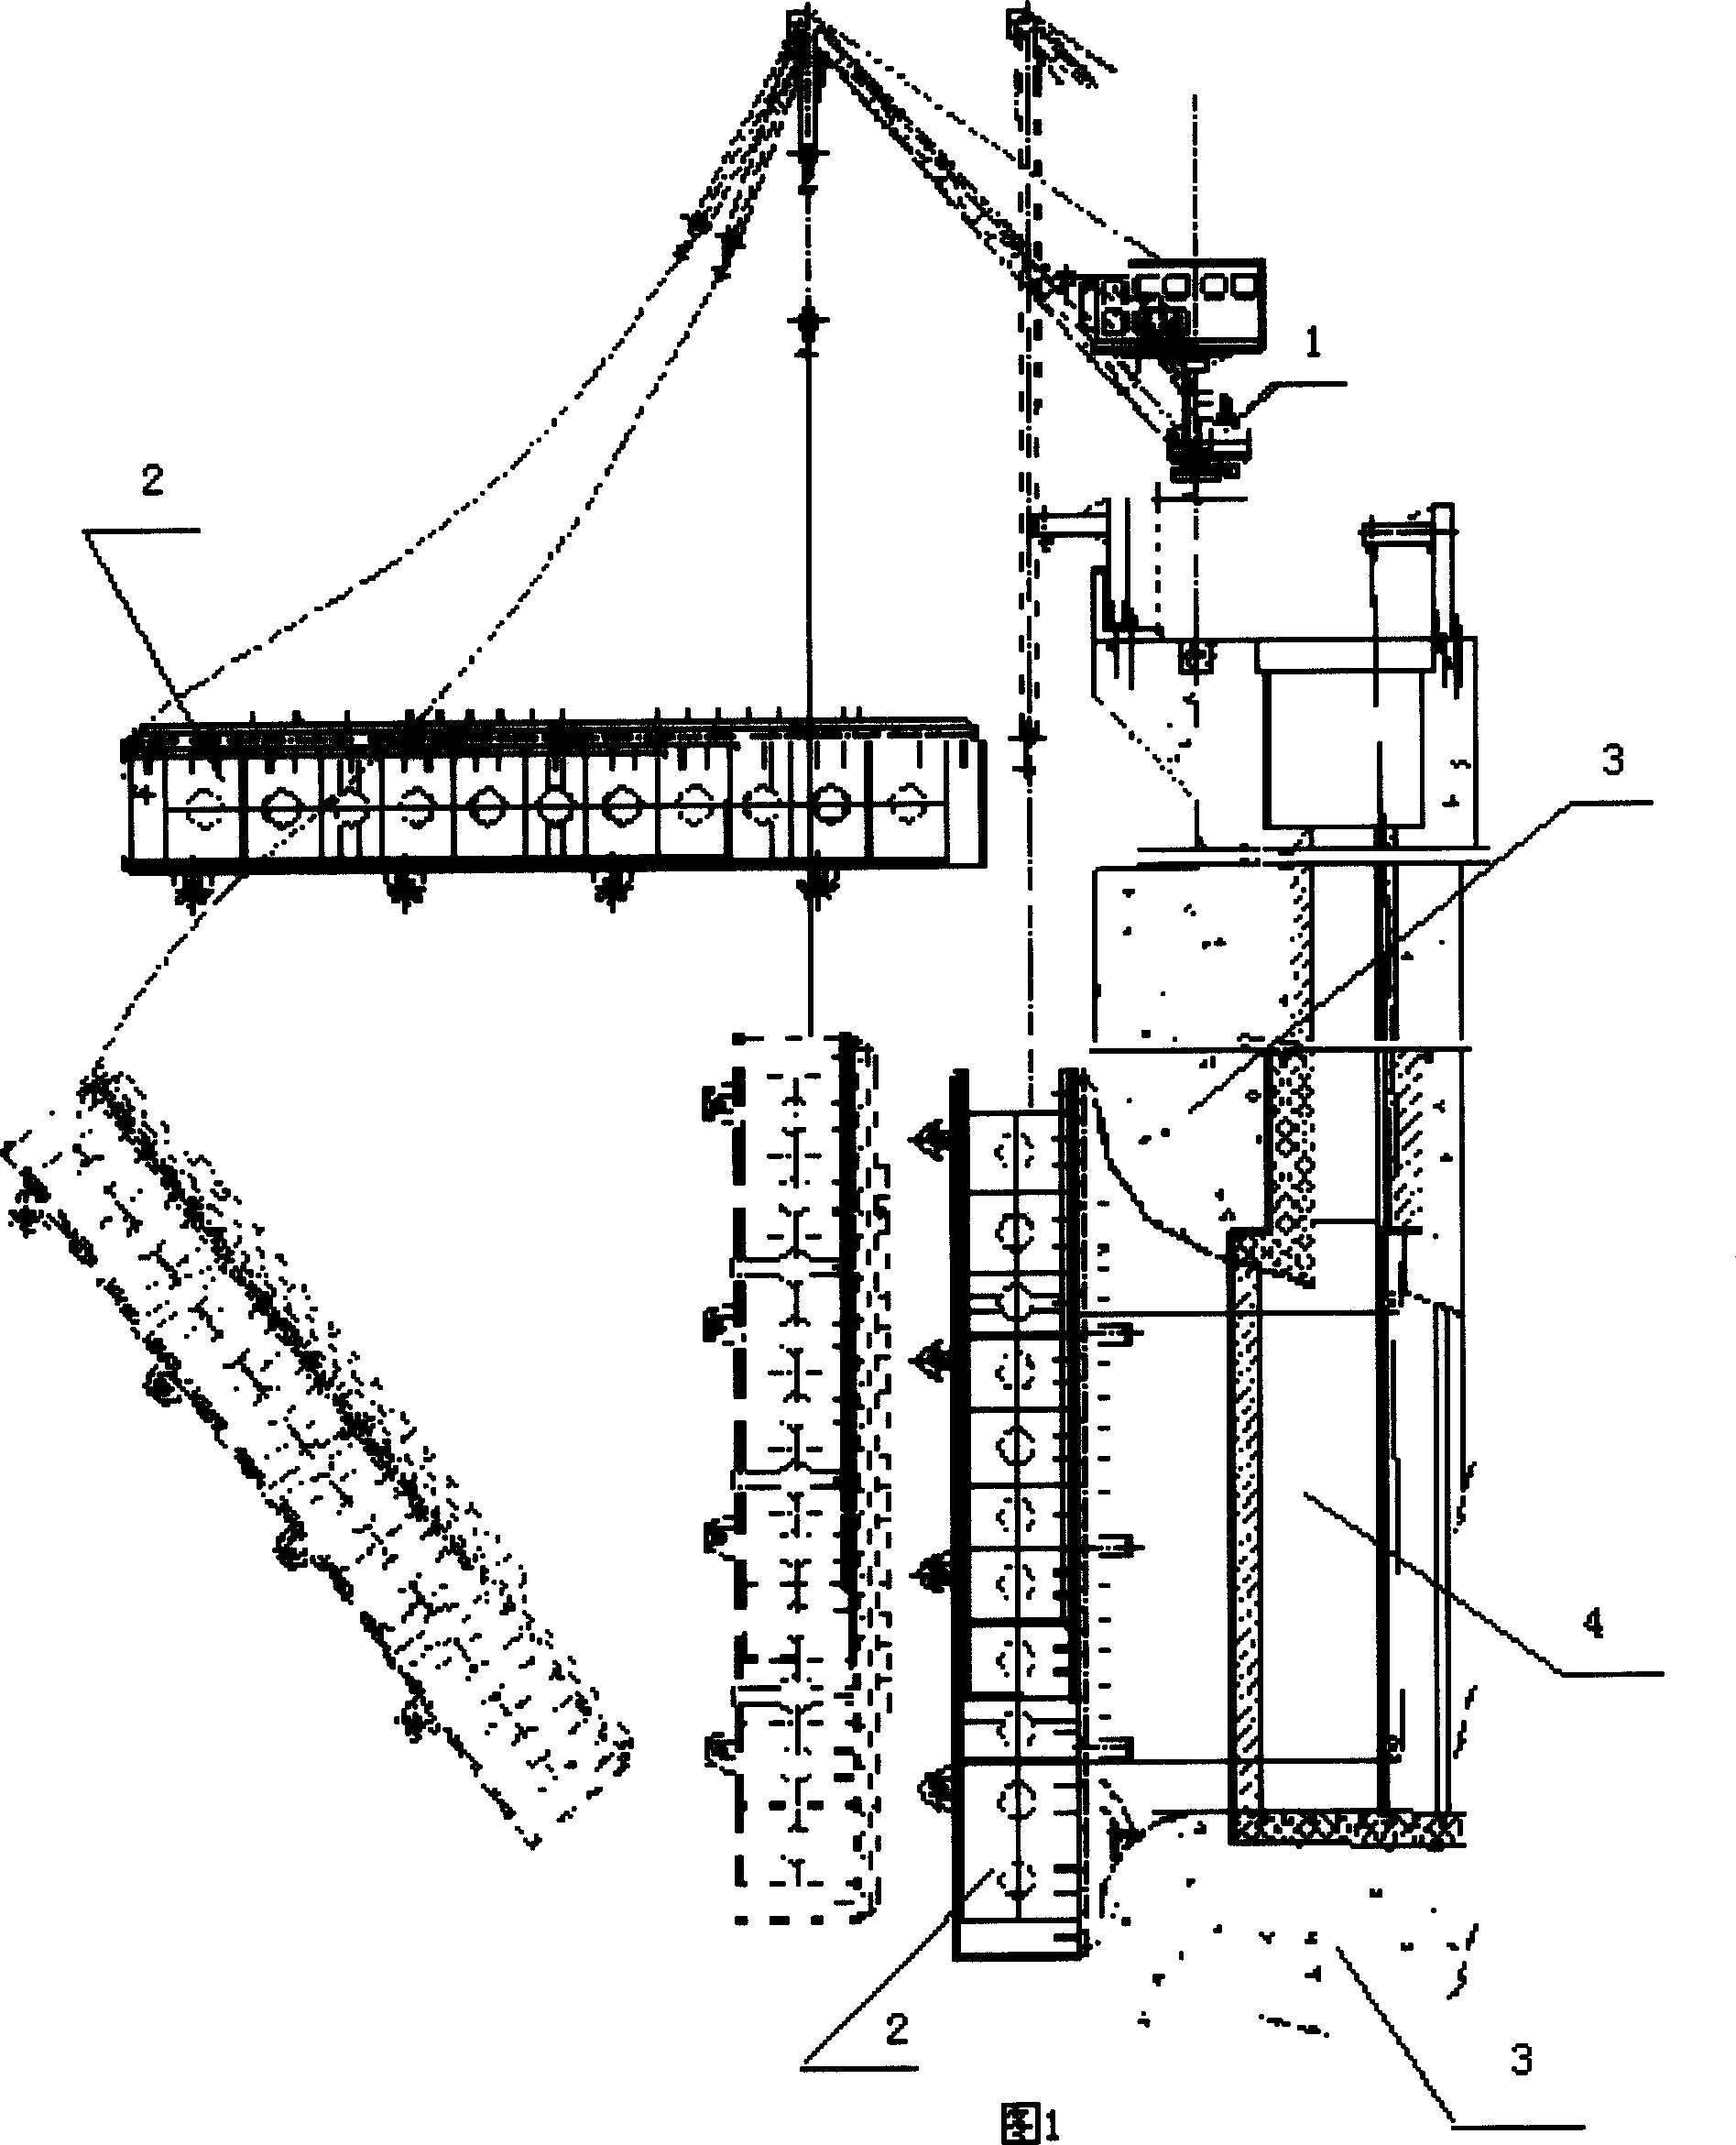 Reparation method for water channel and dockage channel of water power station